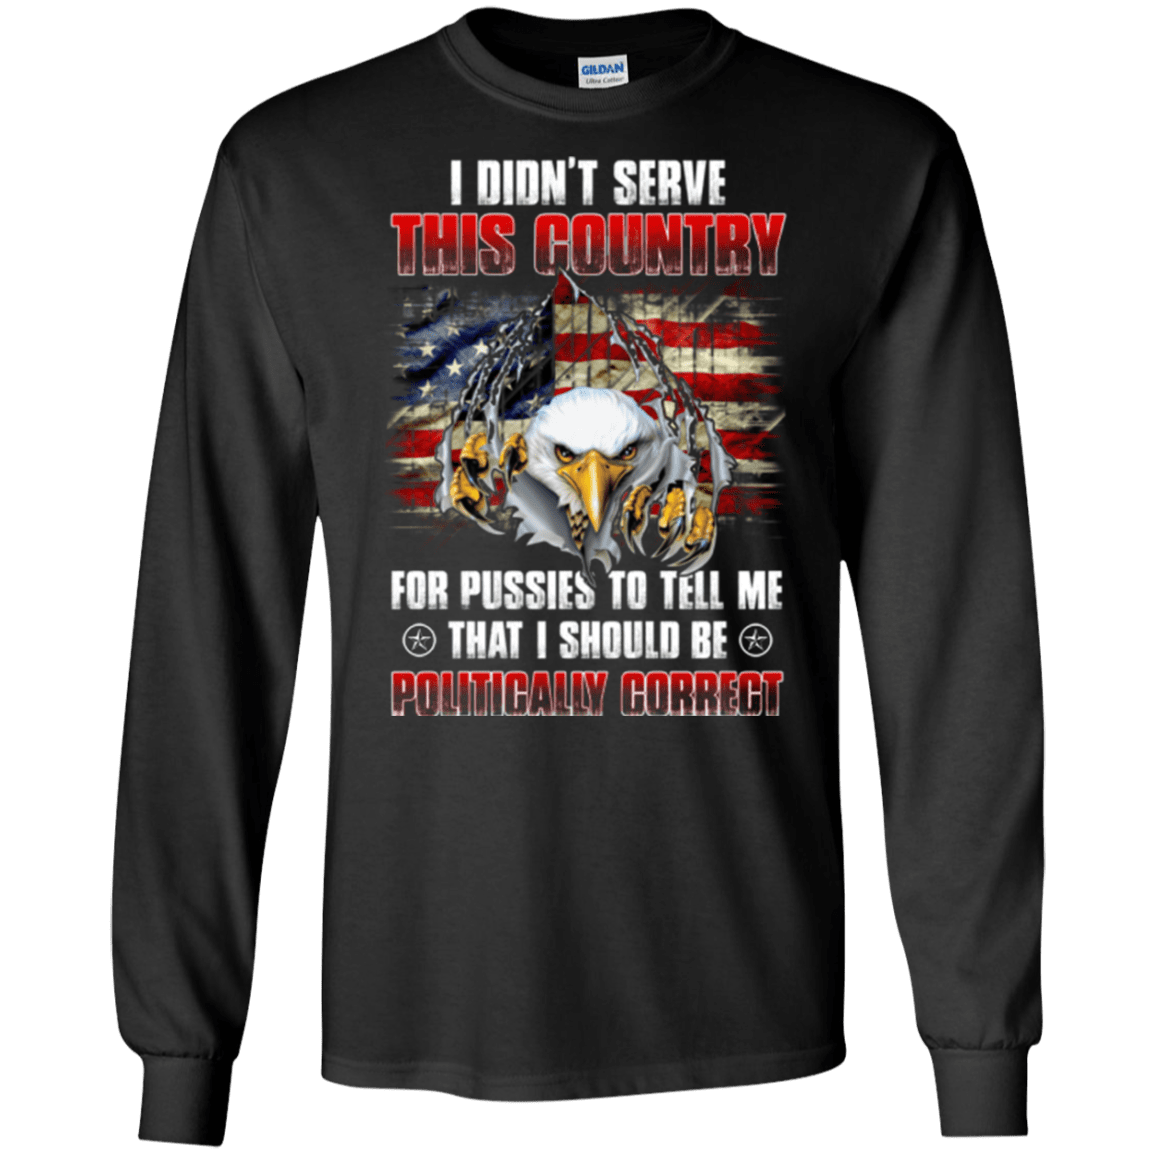 Military T-Shirt "I DIDN'T SERVE THIS COUNTRY"-TShirt-General-Veterans Nation